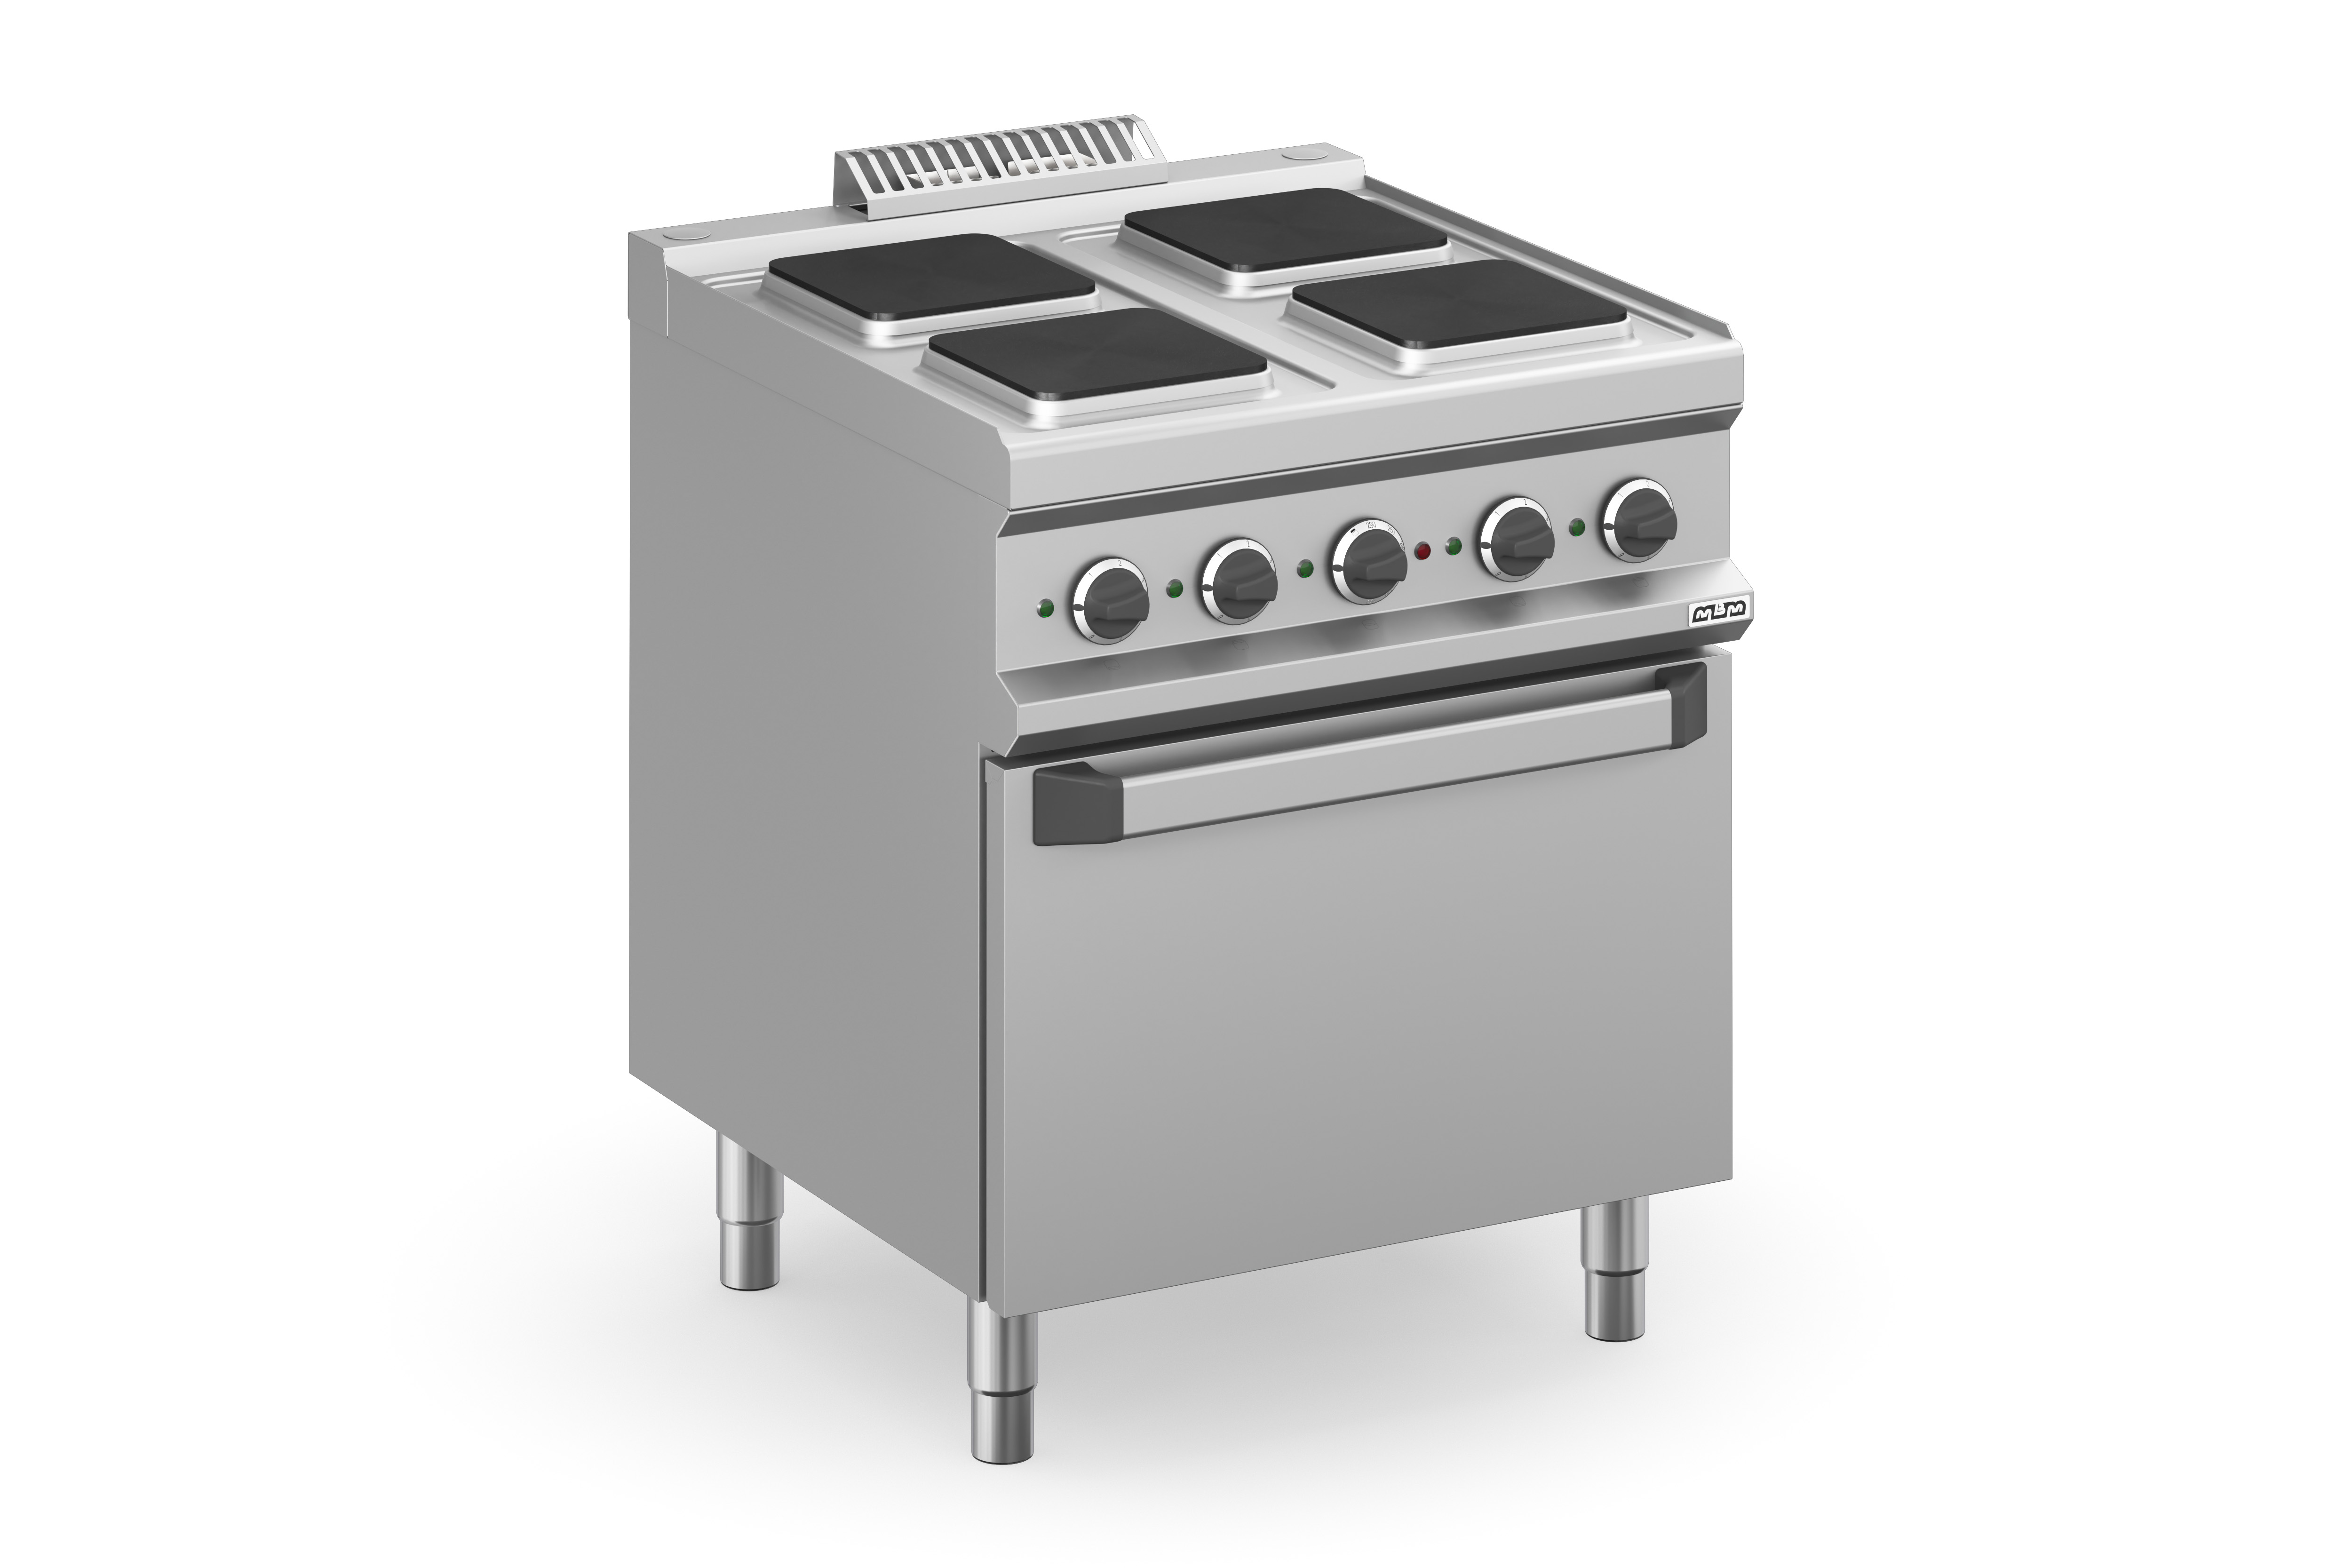 Magistra Plus 700 MPQ77FE 4 Square Plates Freestanding Electric Cooker with Electric Oven